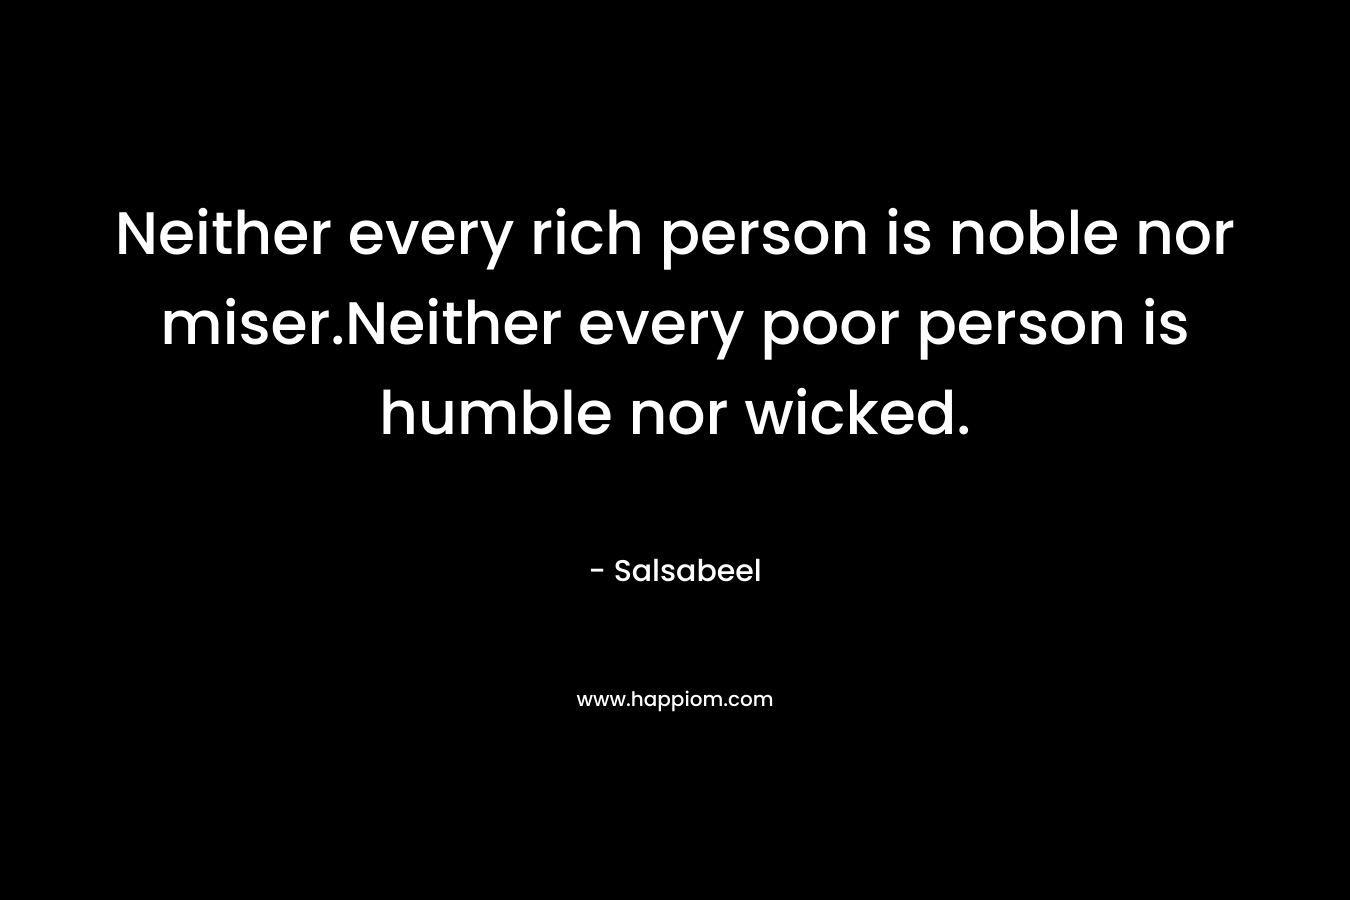 Neither every rich person is noble nor miser.Neither every poor person is humble nor wicked. – Salsabeel